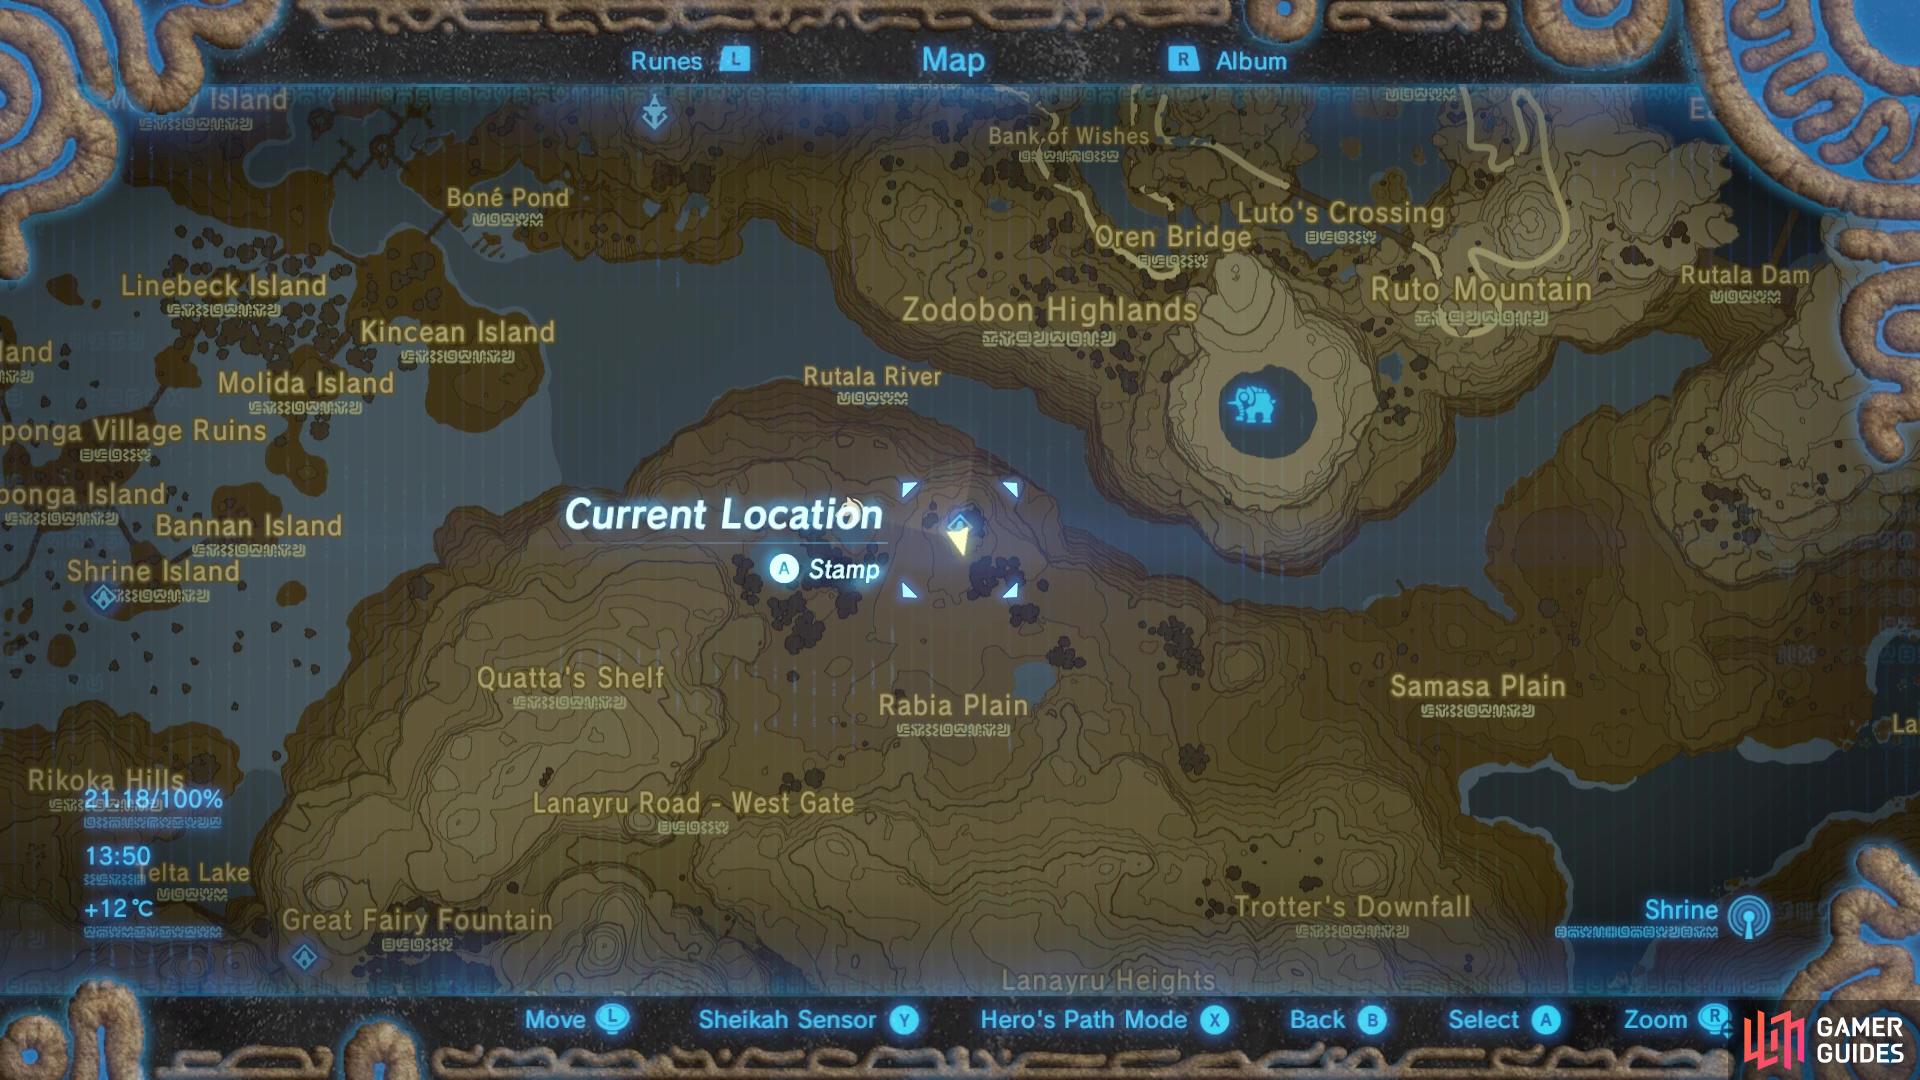 the shrine quest and shrine are found in Rabia Plain